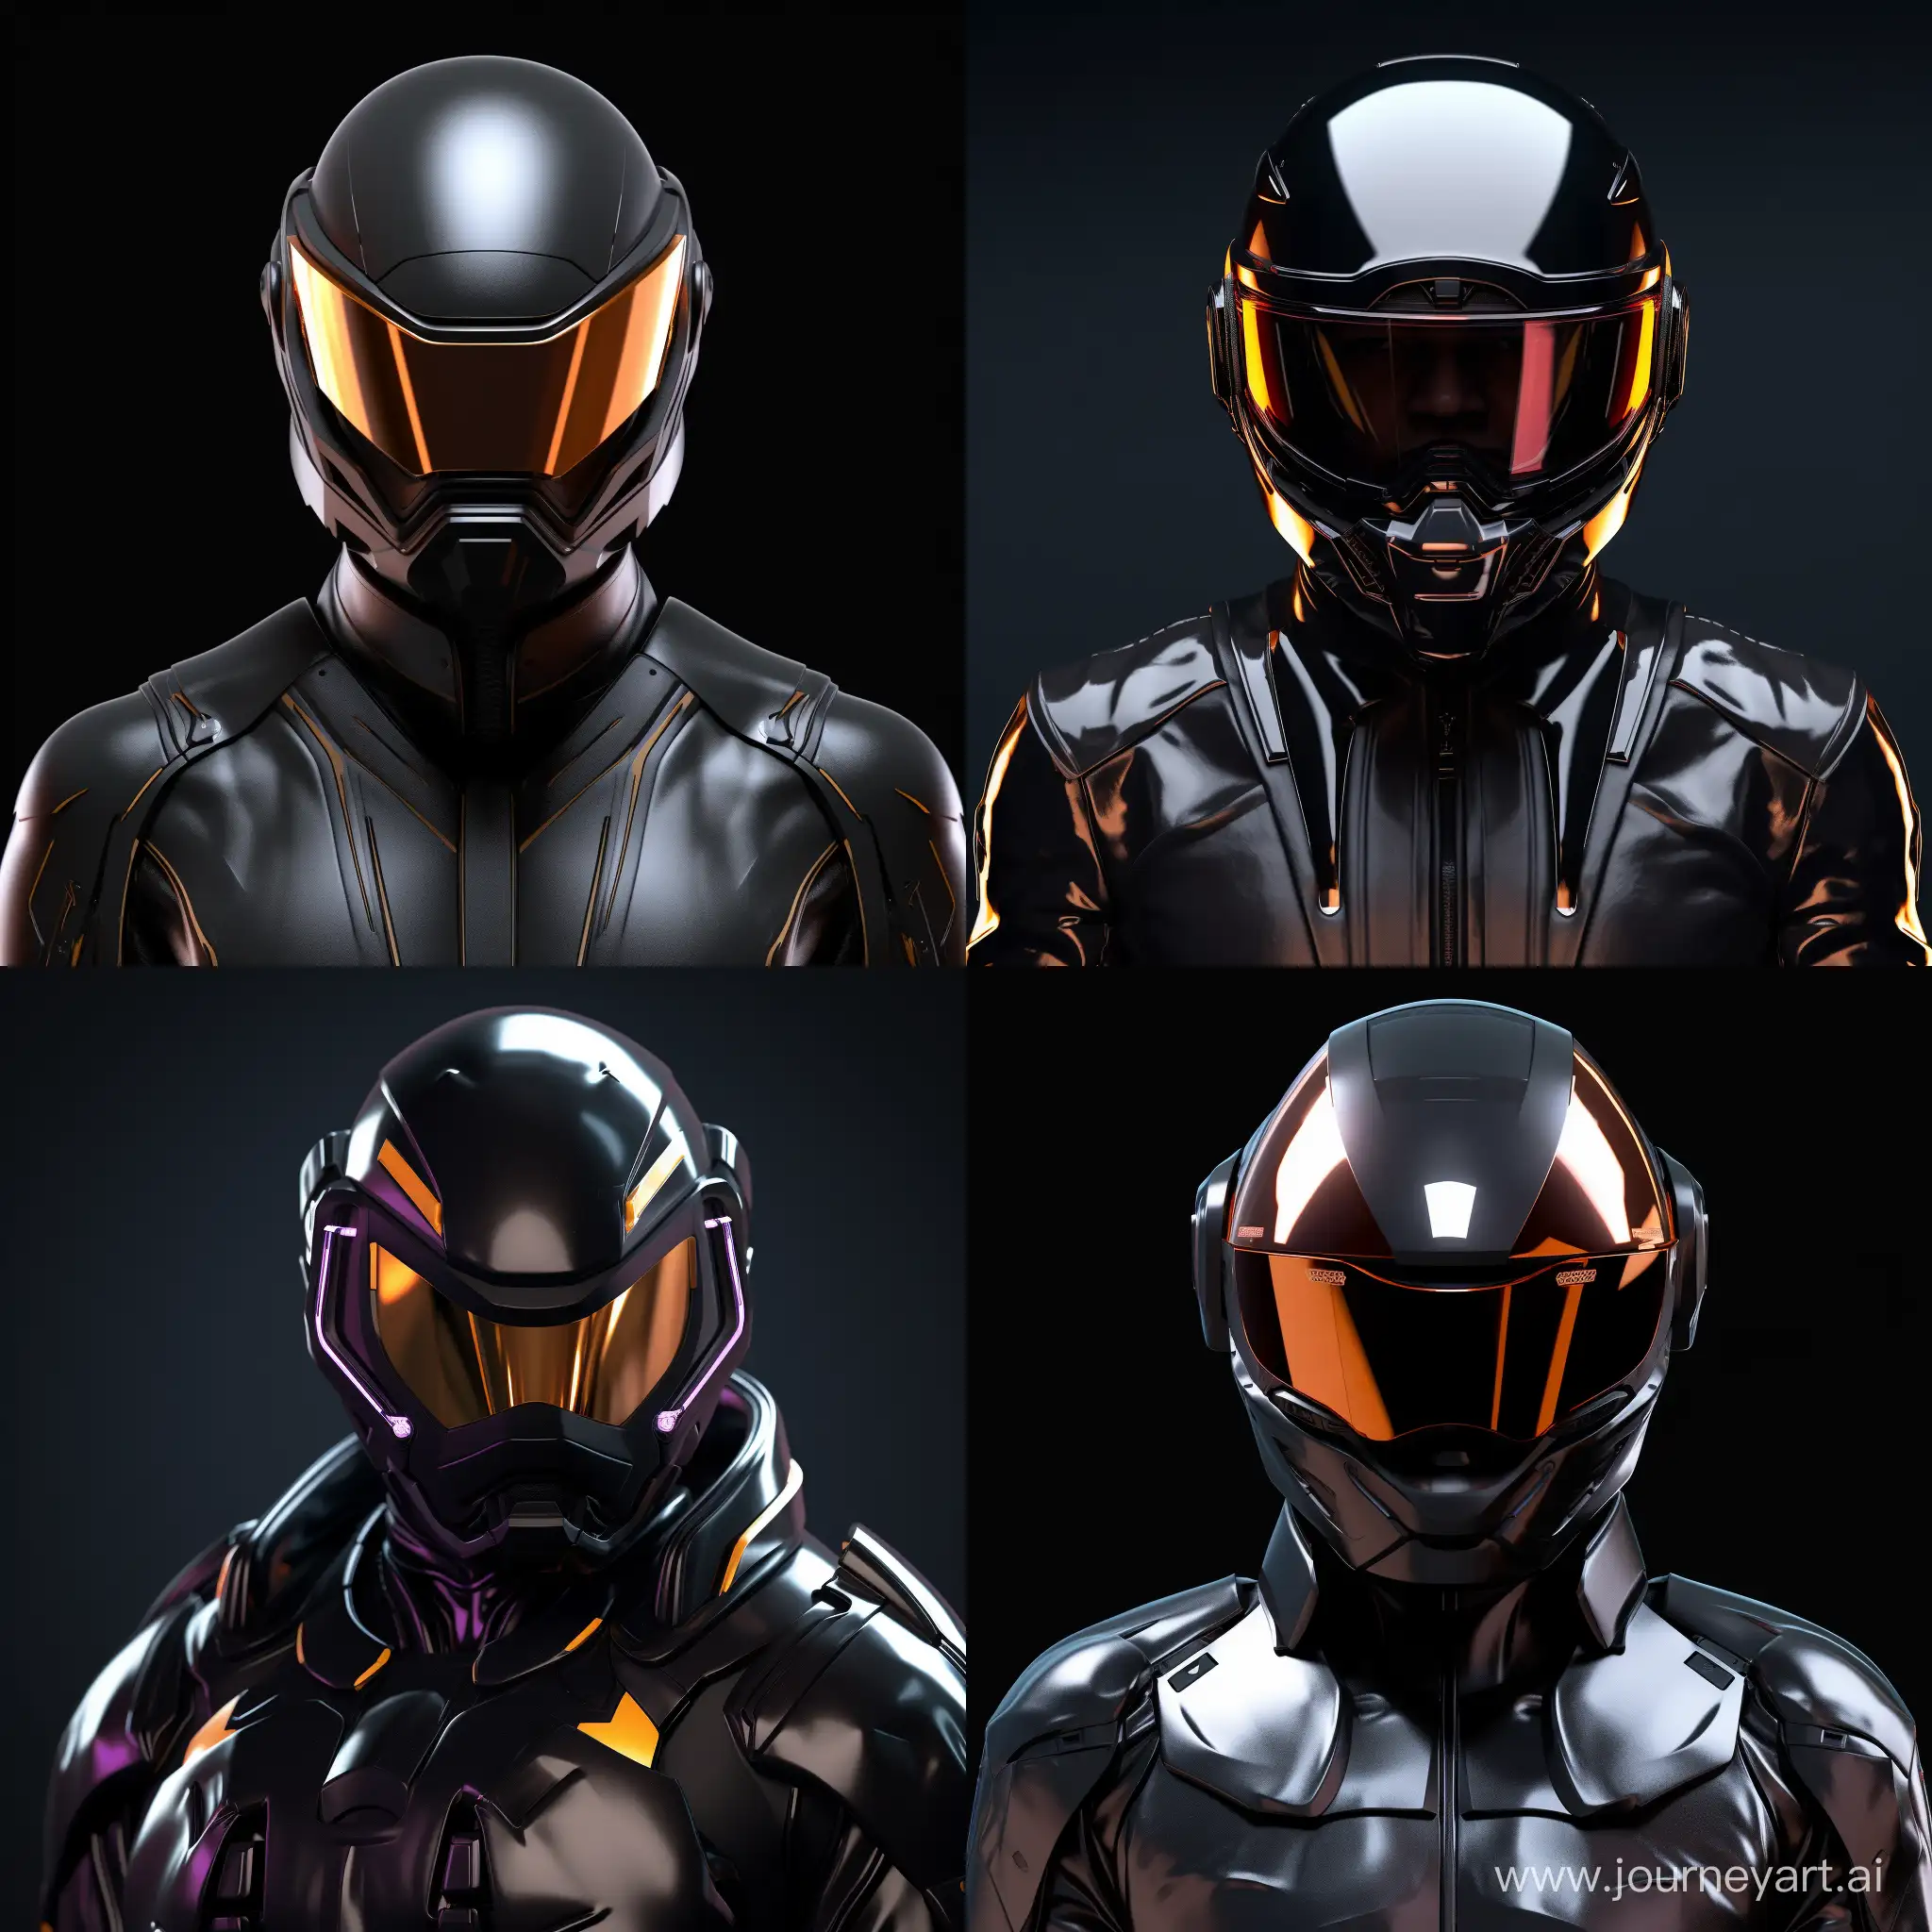 Futuristic-Daft-Punk-Style-Hyperrealistic-3D-Rendering-of-GuyManuel-in-Voluminous-Black-Clothing-and-Mirrored-Helmet